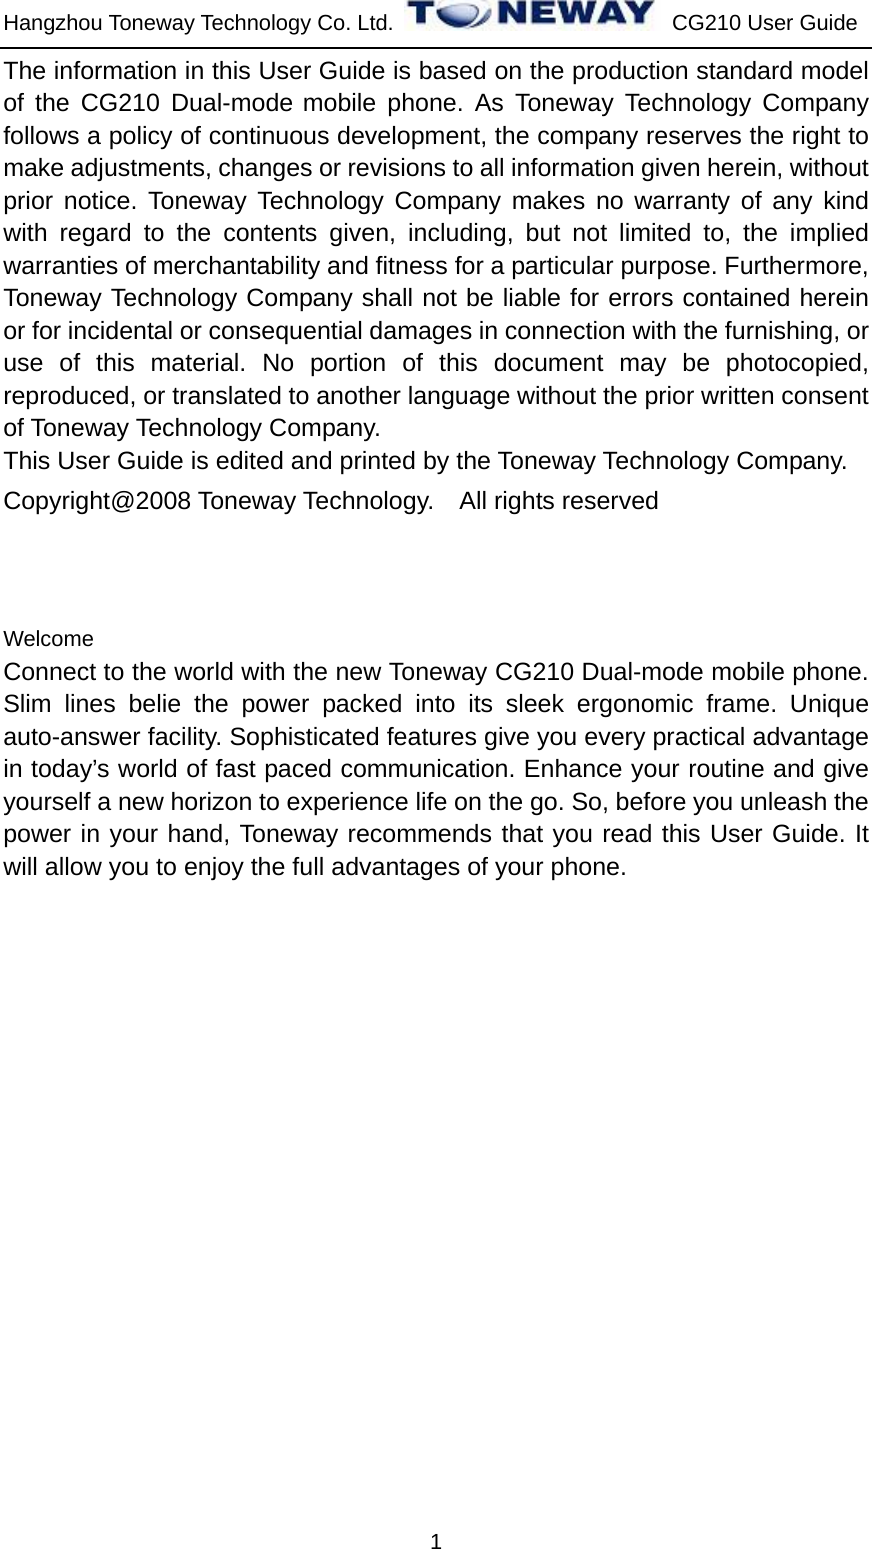 Hangzhou Toneway Technology Co. Ltd.    CG210 User Guide 1 The information in this User Guide is based on the production standard model of the CG210 Dual-mode mobile phone. As Toneway Technology Company follows a policy of continuous development, the company reserves the right to make adjustments, changes or revisions to all information given herein, without prior notice. Toneway Technology Company makes no warranty of any kind with regard to the contents given, including, but not limited to, the implied warranties of merchantability and fitness for a particular purpose. Furthermore, Toneway Technology Company shall not be liable for errors contained herein or for incidental or consequential damages in connection with the furnishing, or use of this material. No portion of this document may be photocopied, reproduced, or translated to another language without the prior written consent of Toneway Technology Company. This User Guide is edited and printed by the Toneway Technology Company. Copyright@2008 Toneway Technology.    All rights reserved    Welcome Connect to the world with the new Toneway CG210 Dual-mode mobile phone. Slim lines belie the power packed into its sleek ergonomic frame. Unique auto-answer facility. Sophisticated features give you every practical advantage in today’s world of fast paced communication. Enhance your routine and give yourself a new horizon to experience life on the go. So, before you unleash the power in your hand, Toneway recommends that you read this User Guide. It will allow you to enjoy the full advantages of your phone.                    